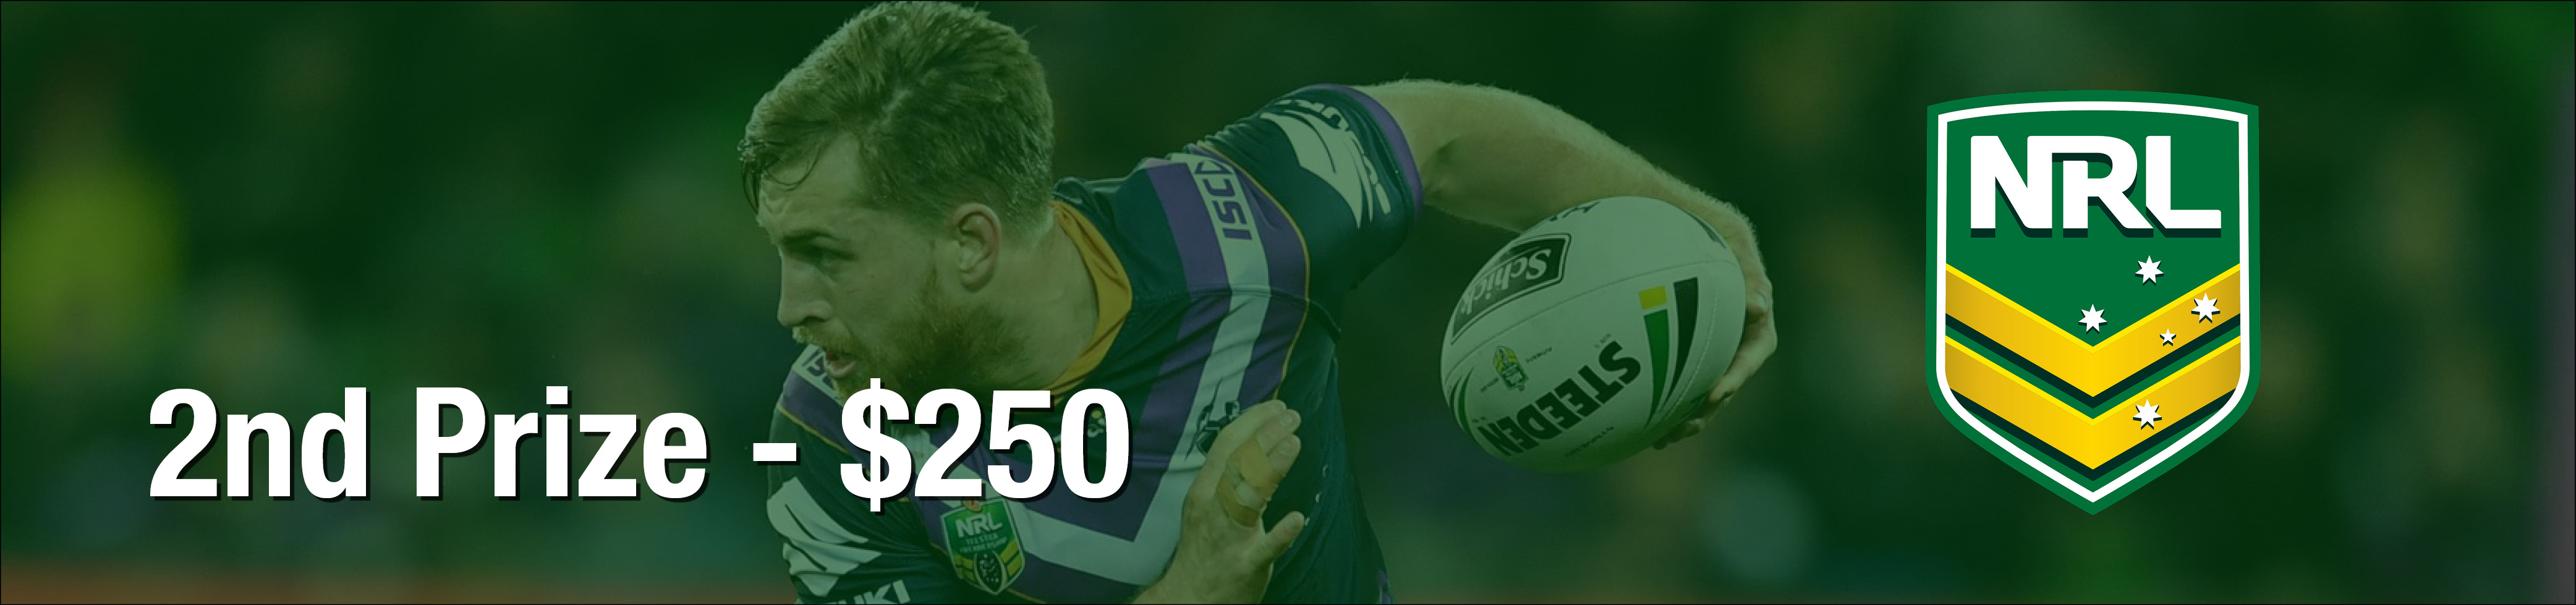 EXEDY NRL TIPPING COMP 2020